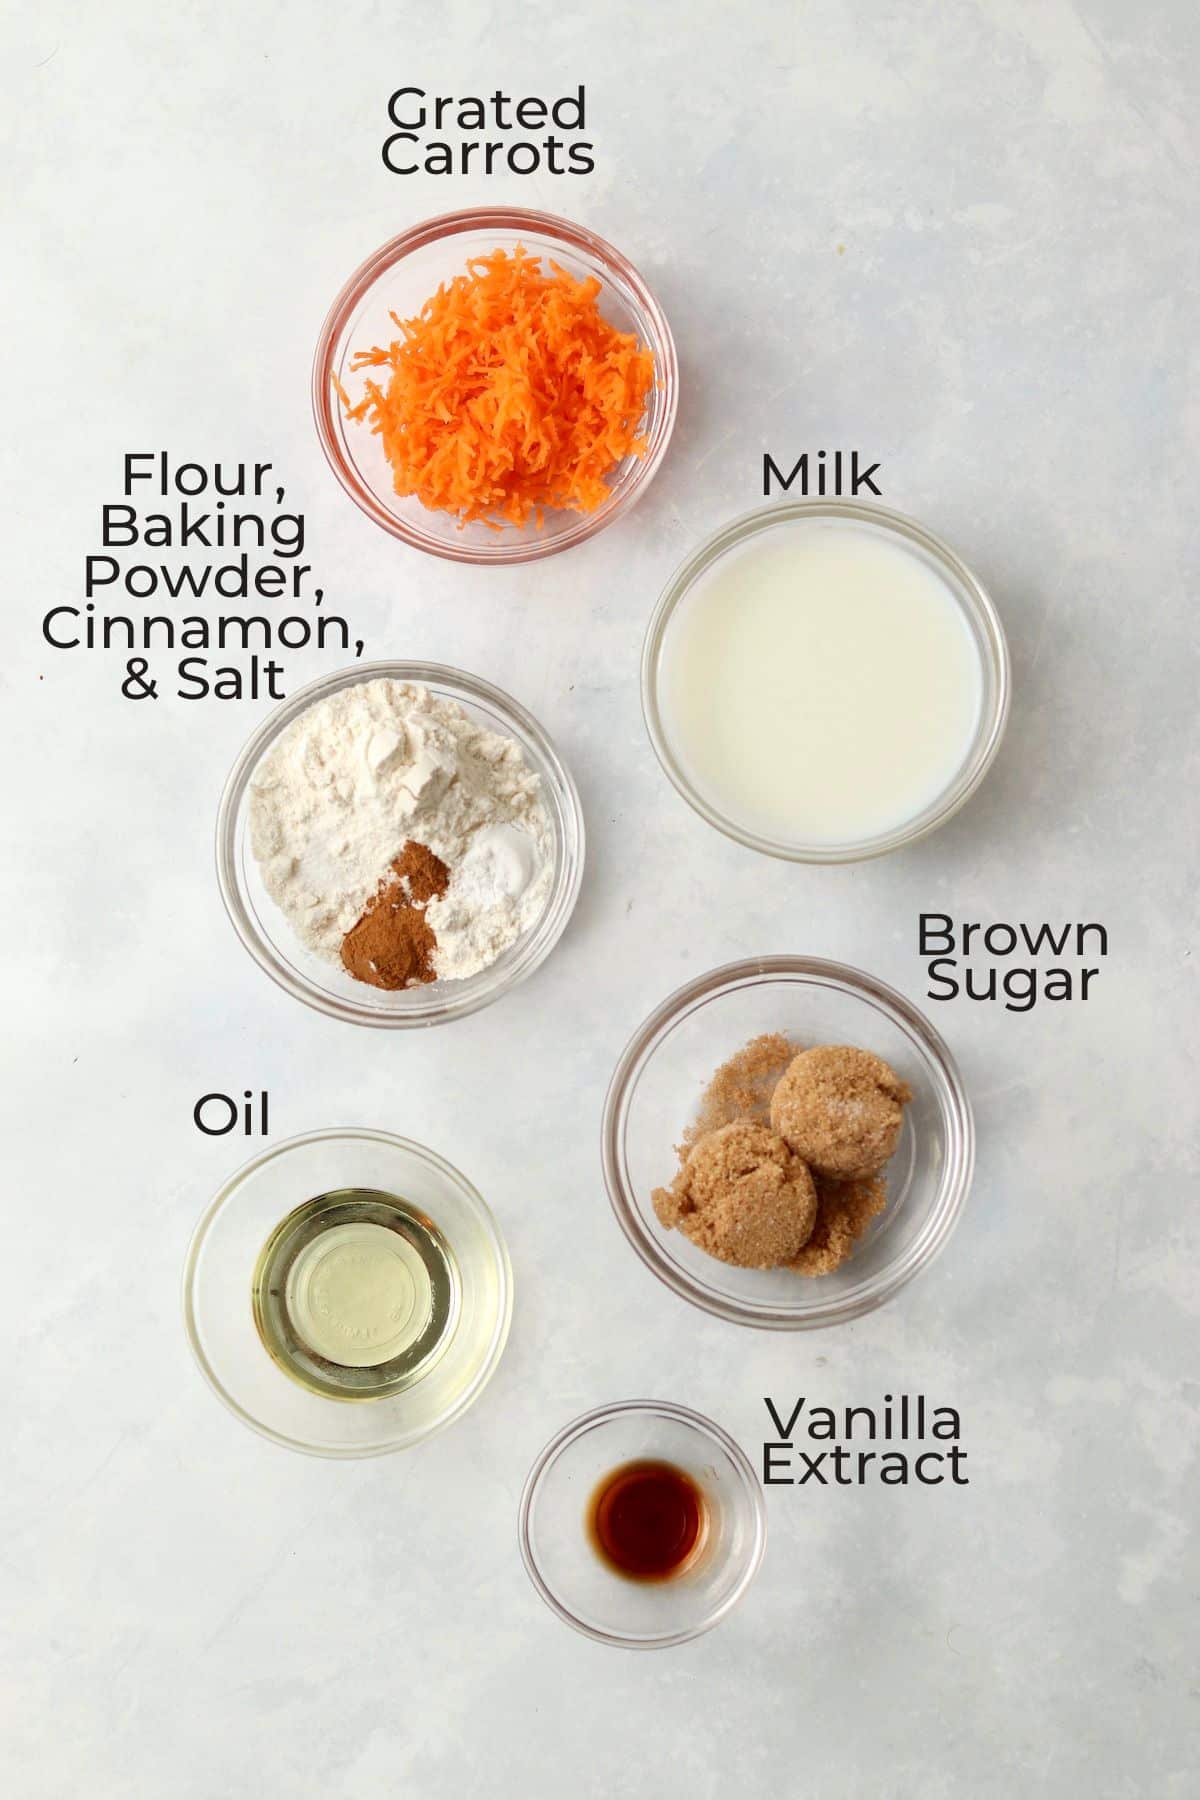 grated carrots, milk, flour, baking powder, cinnamon, oil, brown sugar, and vanilla extract in small bowls